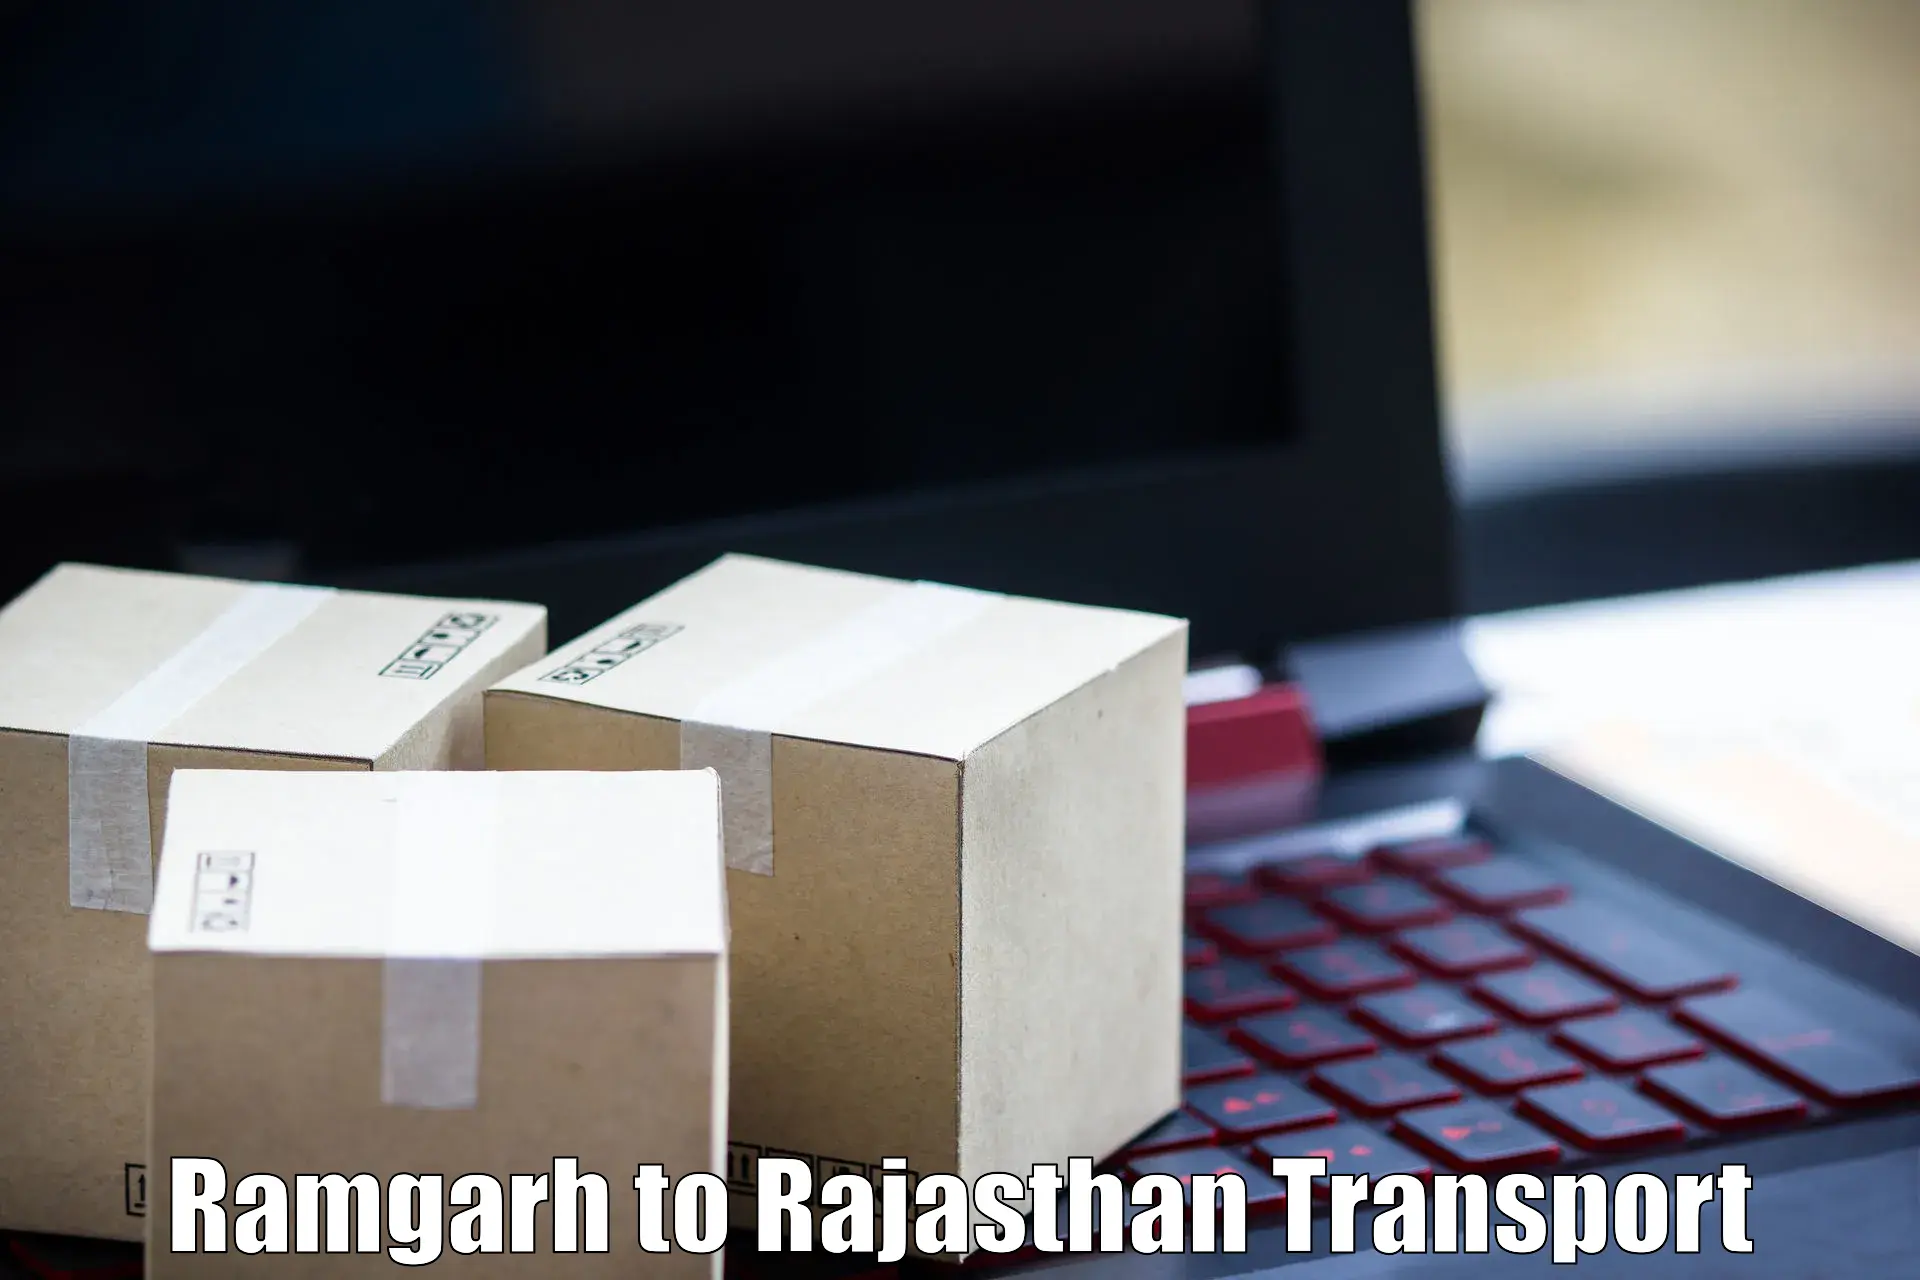 Delivery service Ramgarh to Ramgarh Sikar